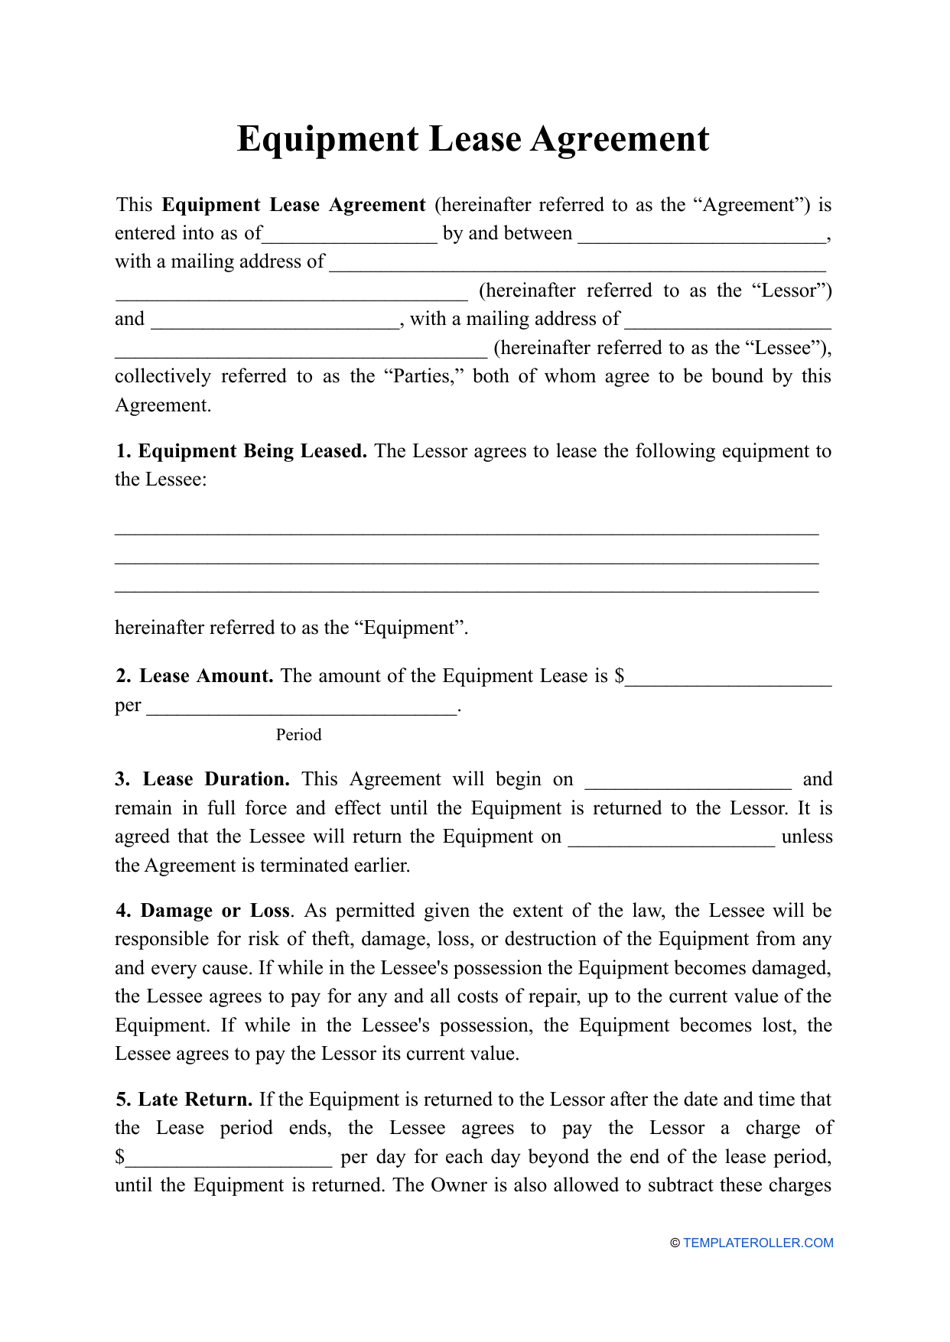 Equipment Lease Agreement Template, Page 1